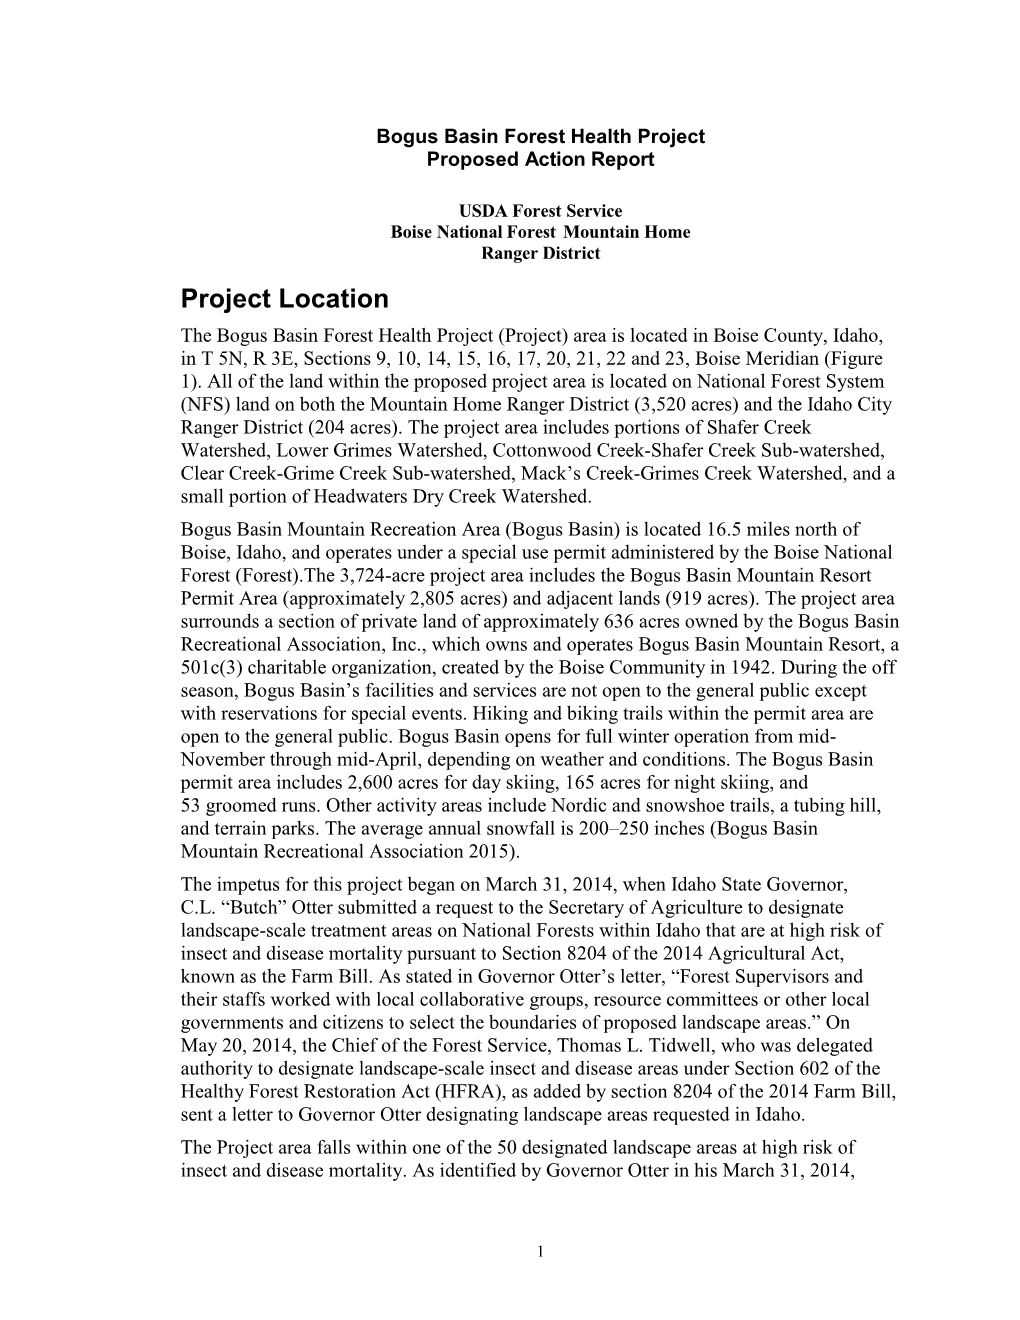 Bogus Basin Forest Health Project Proposed Action Report